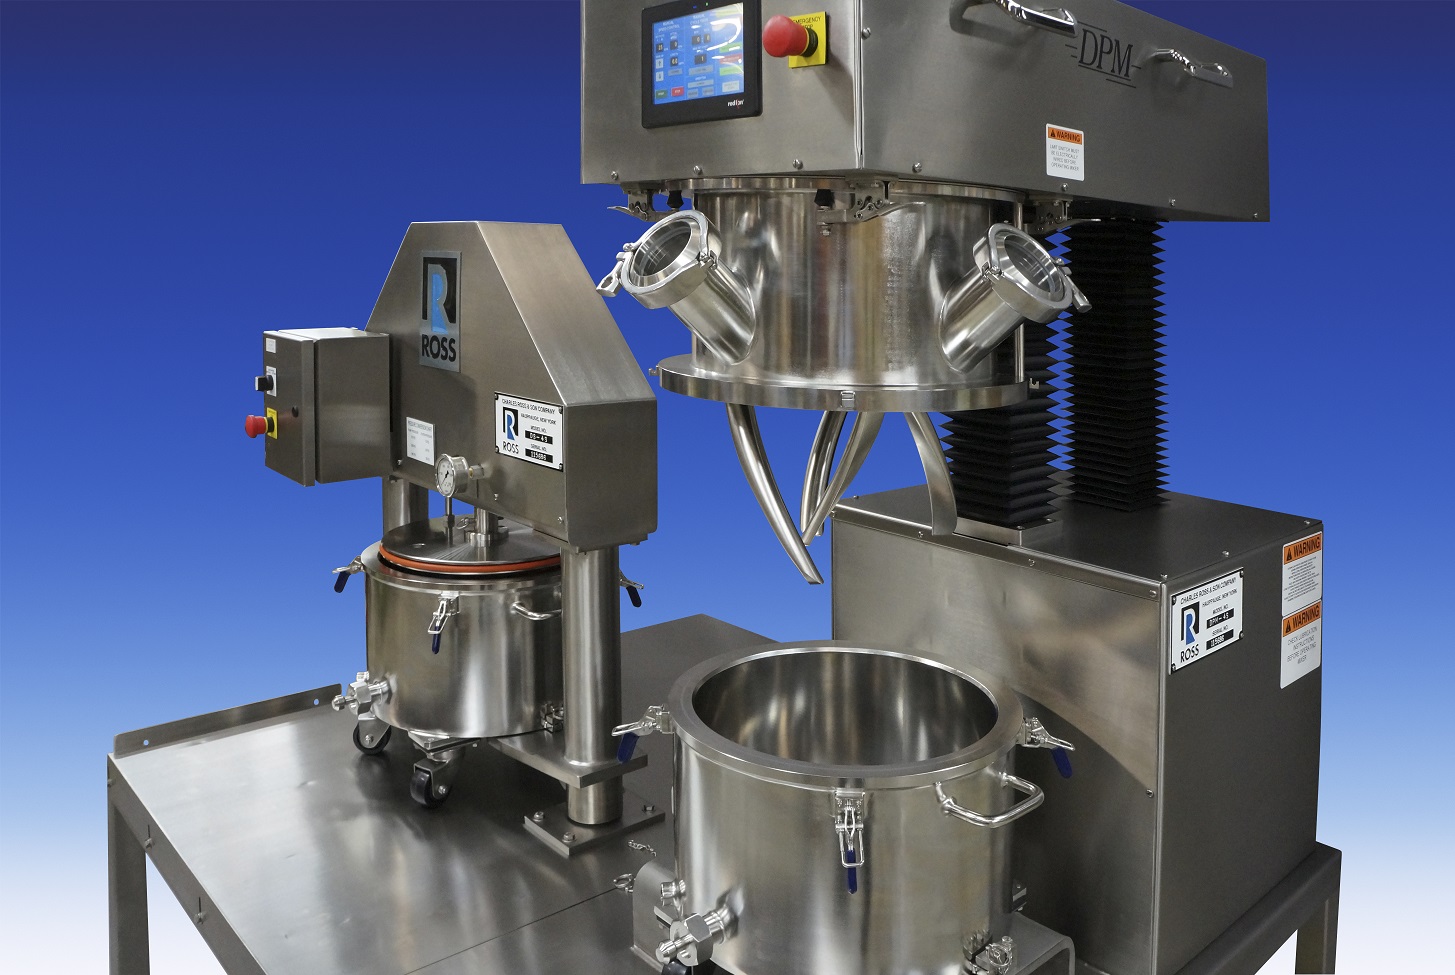 Charles Ross says that its double planetary mixer is now available in a ‘super sanitary’ turnkey configuration.